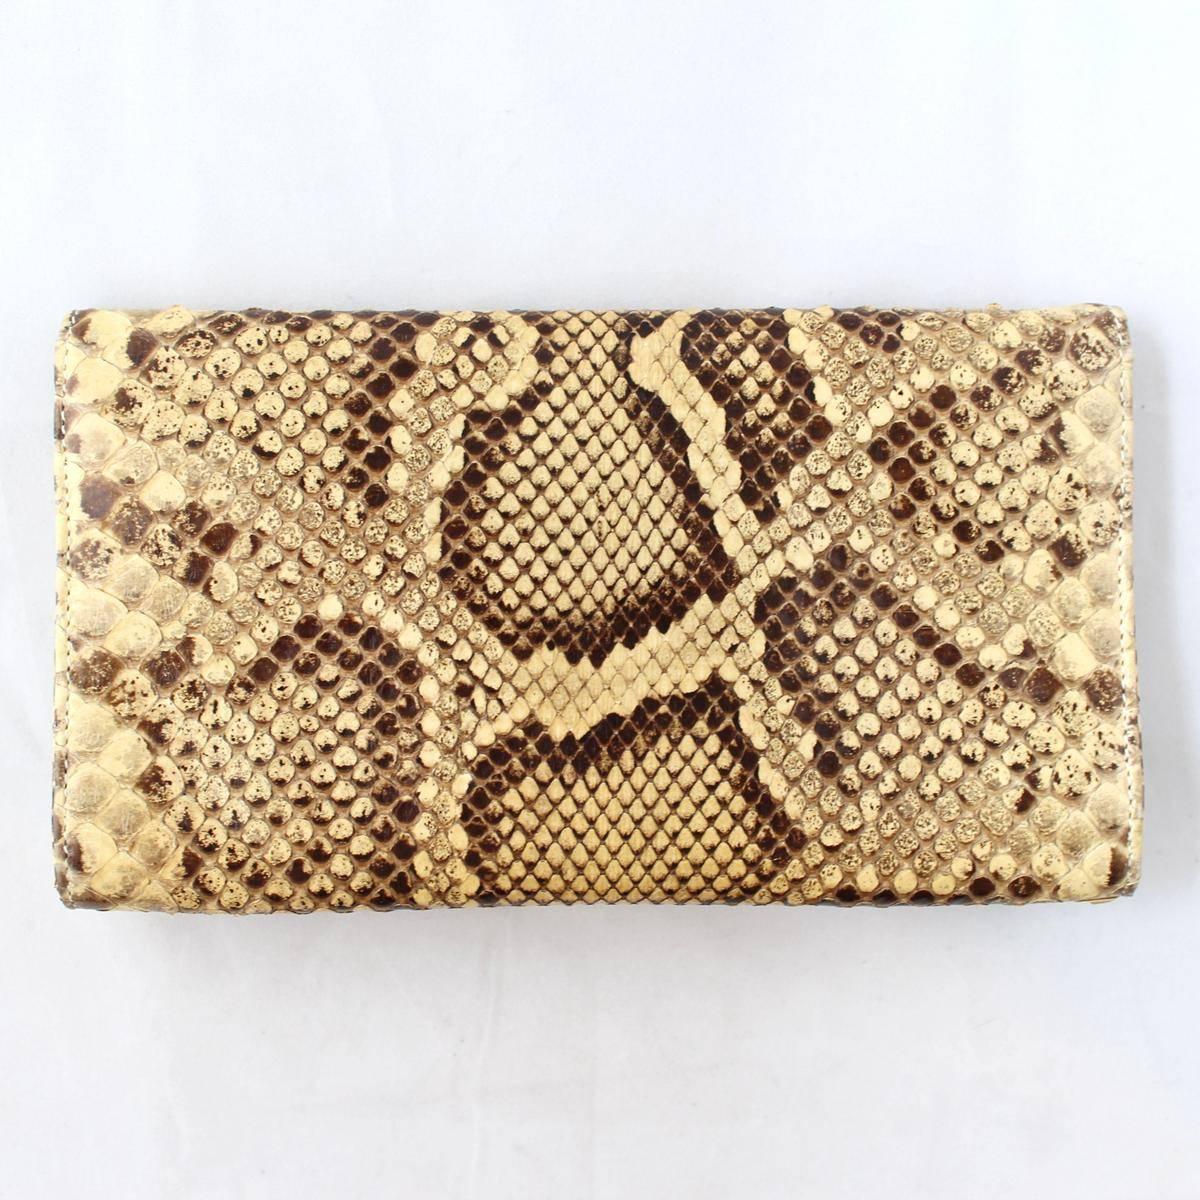 Dolce & Gabbana super chic and trendy pochette
Real reptile
Amber rock color
Metal DG
Metal chain
Double authomatic button closure
Internal poket 
Cm 21 x 11 (8.2 x 4.3 inches)
Worldwide express shipping included in the price !